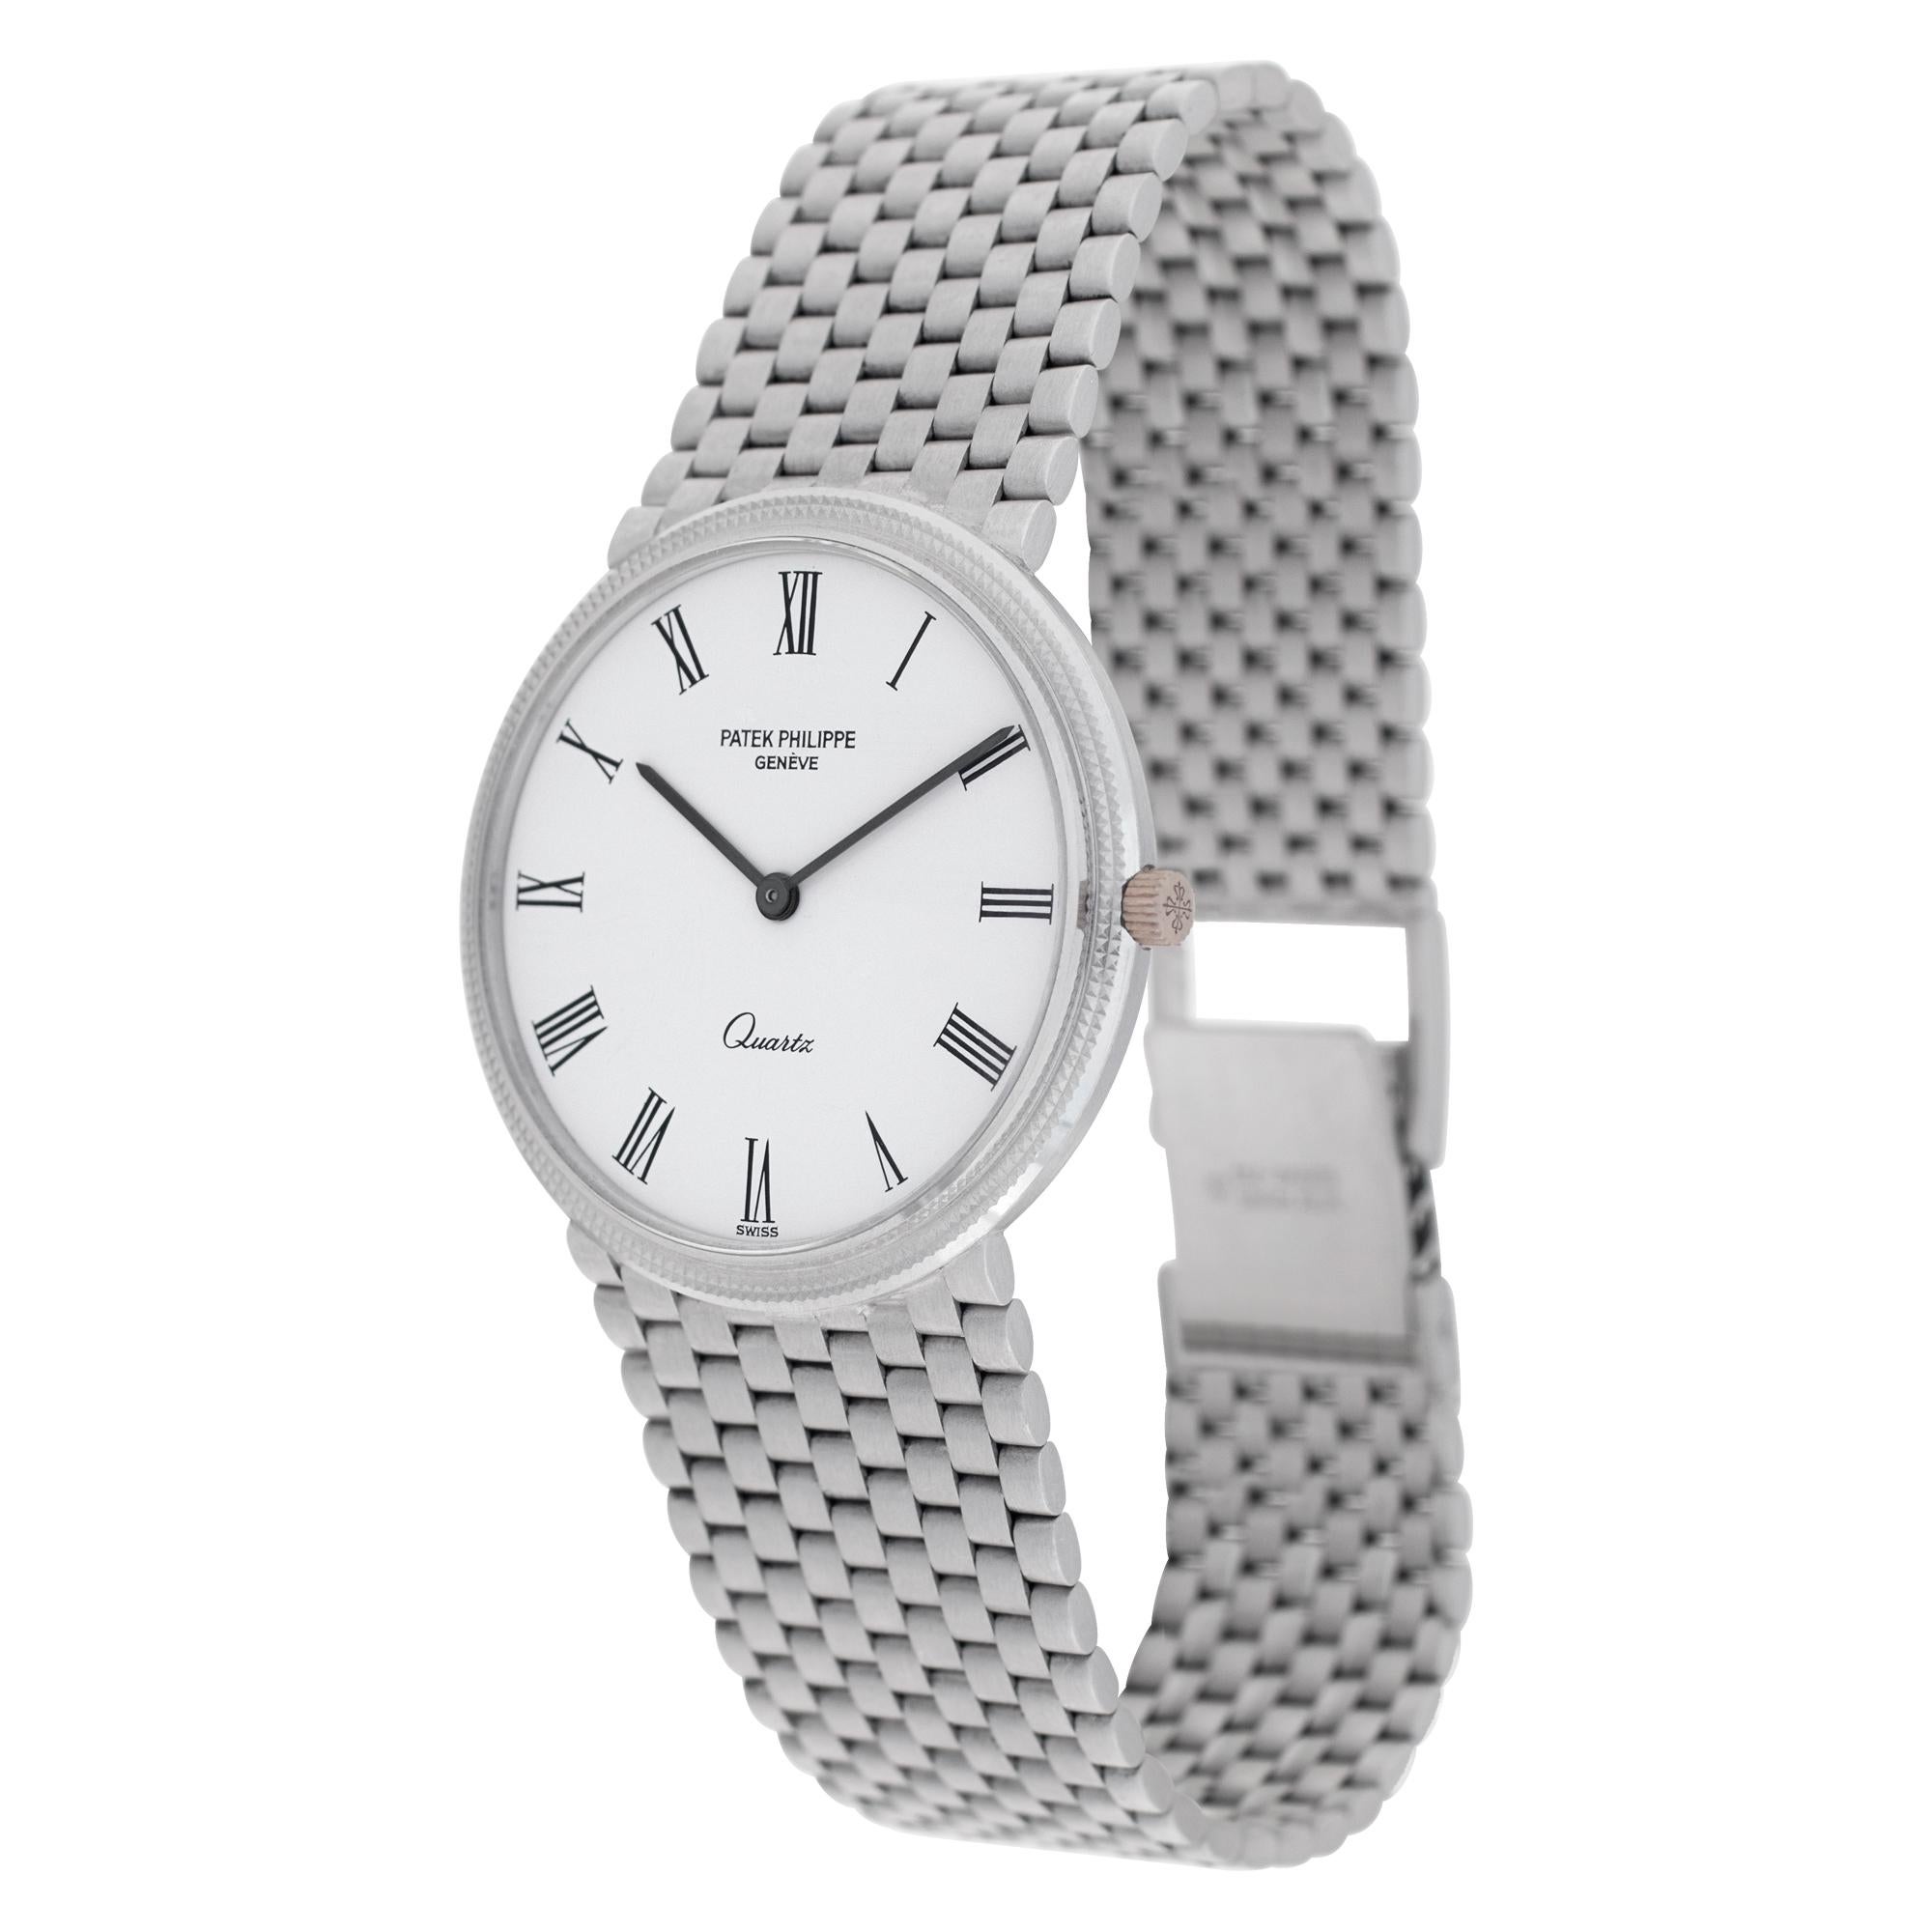 Patek Philippe Calatrava in 18k white gold with hobnail bezel. Quartz. 33 mm case size. Fits 7.25 inches. Ref 3744. Fine Pre-owned Patek Philippe Watch. Certified preowned Classic Patek Philippe Calatrava 3744 watch is made out of white gold on a